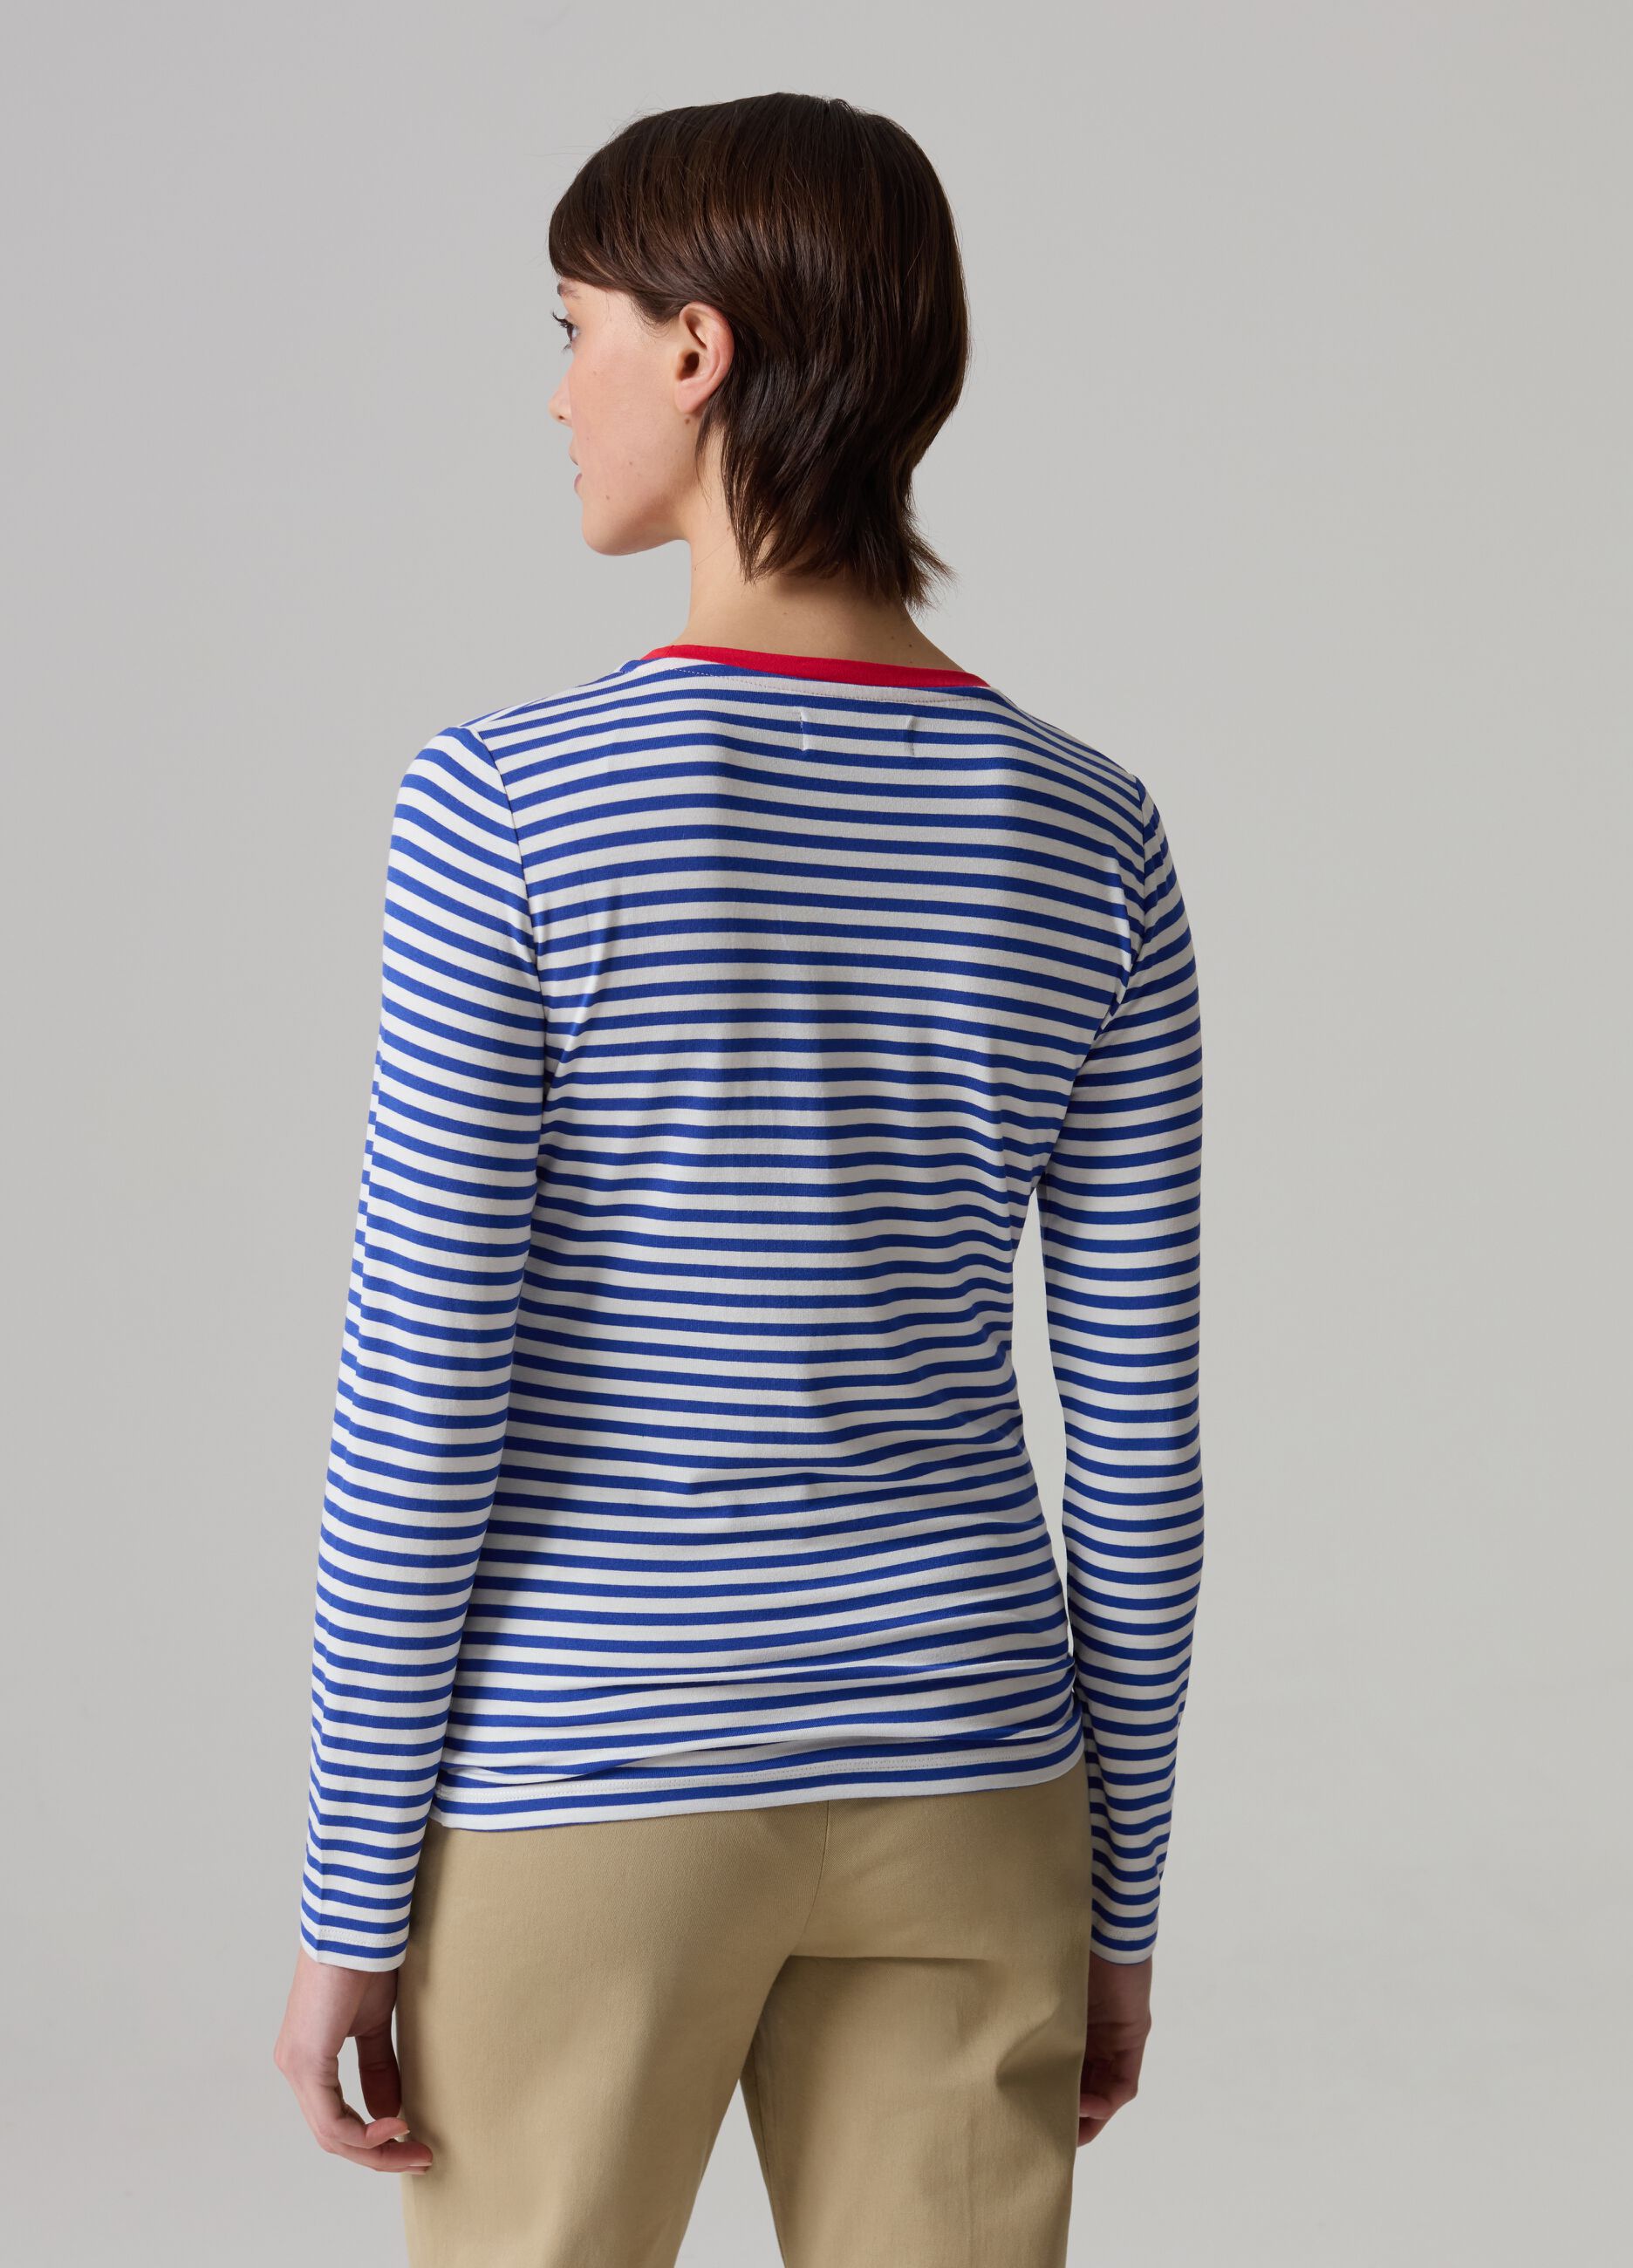 Striped T-shirt with contrasting edging